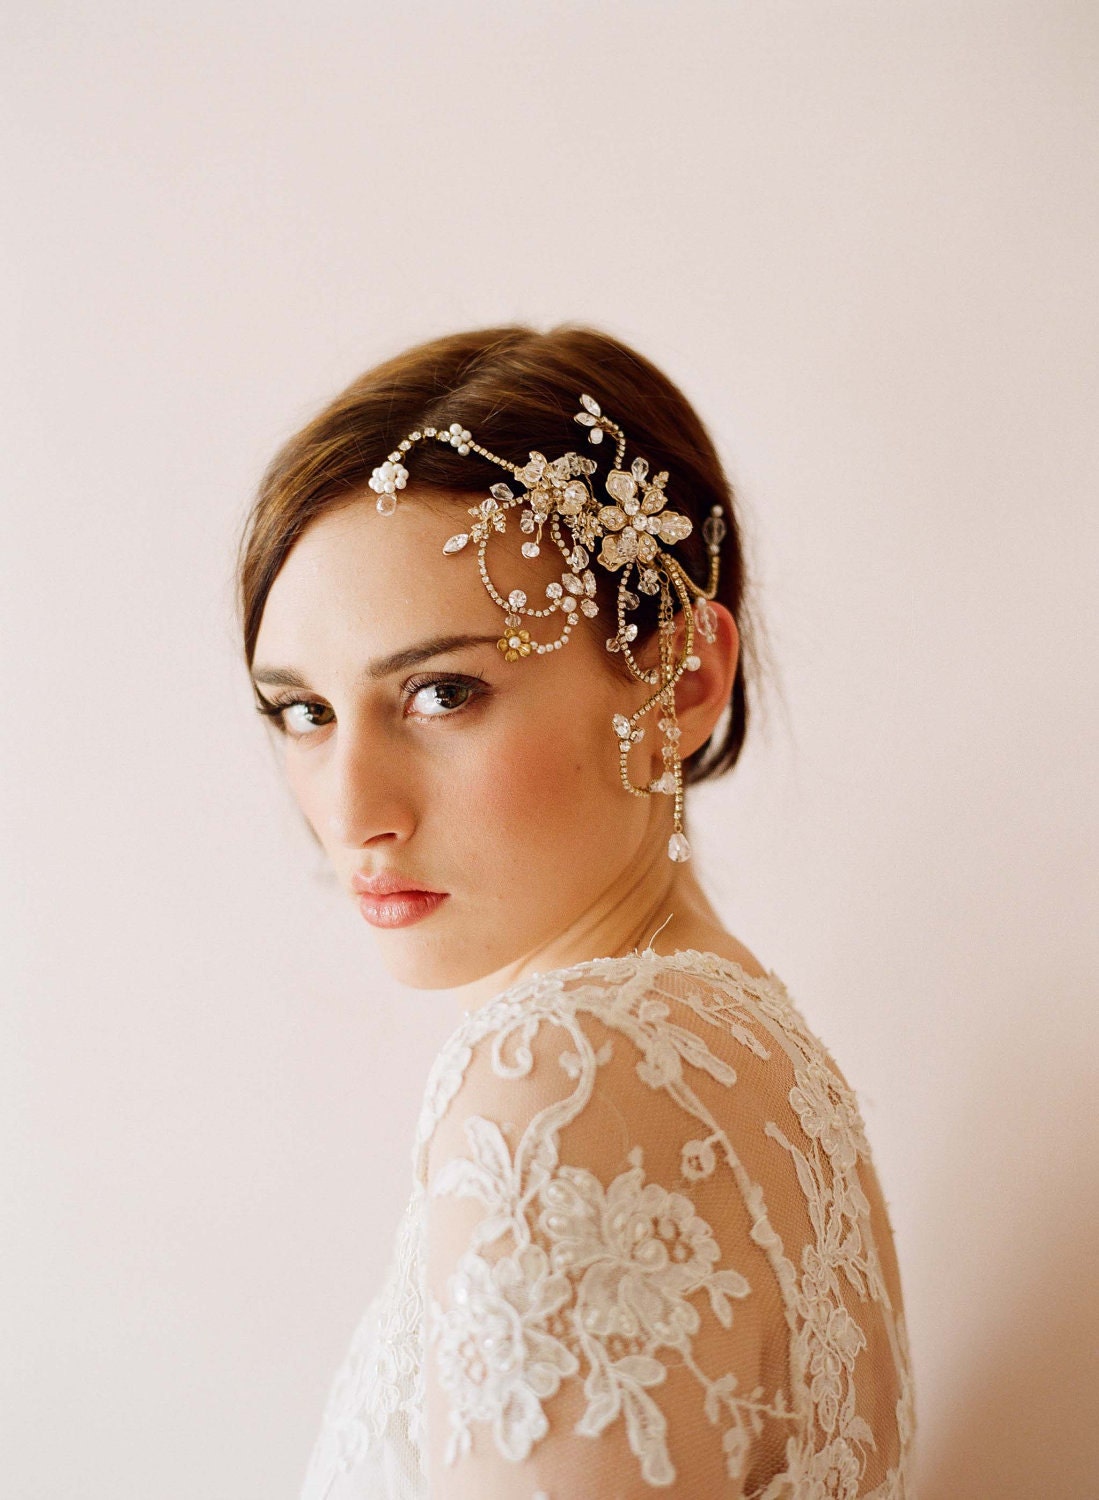 Bridal rhinestone headpiece, hair comb - Dazzling twisted rhinestone and pearl headpiece - Style 245 - Made to Order